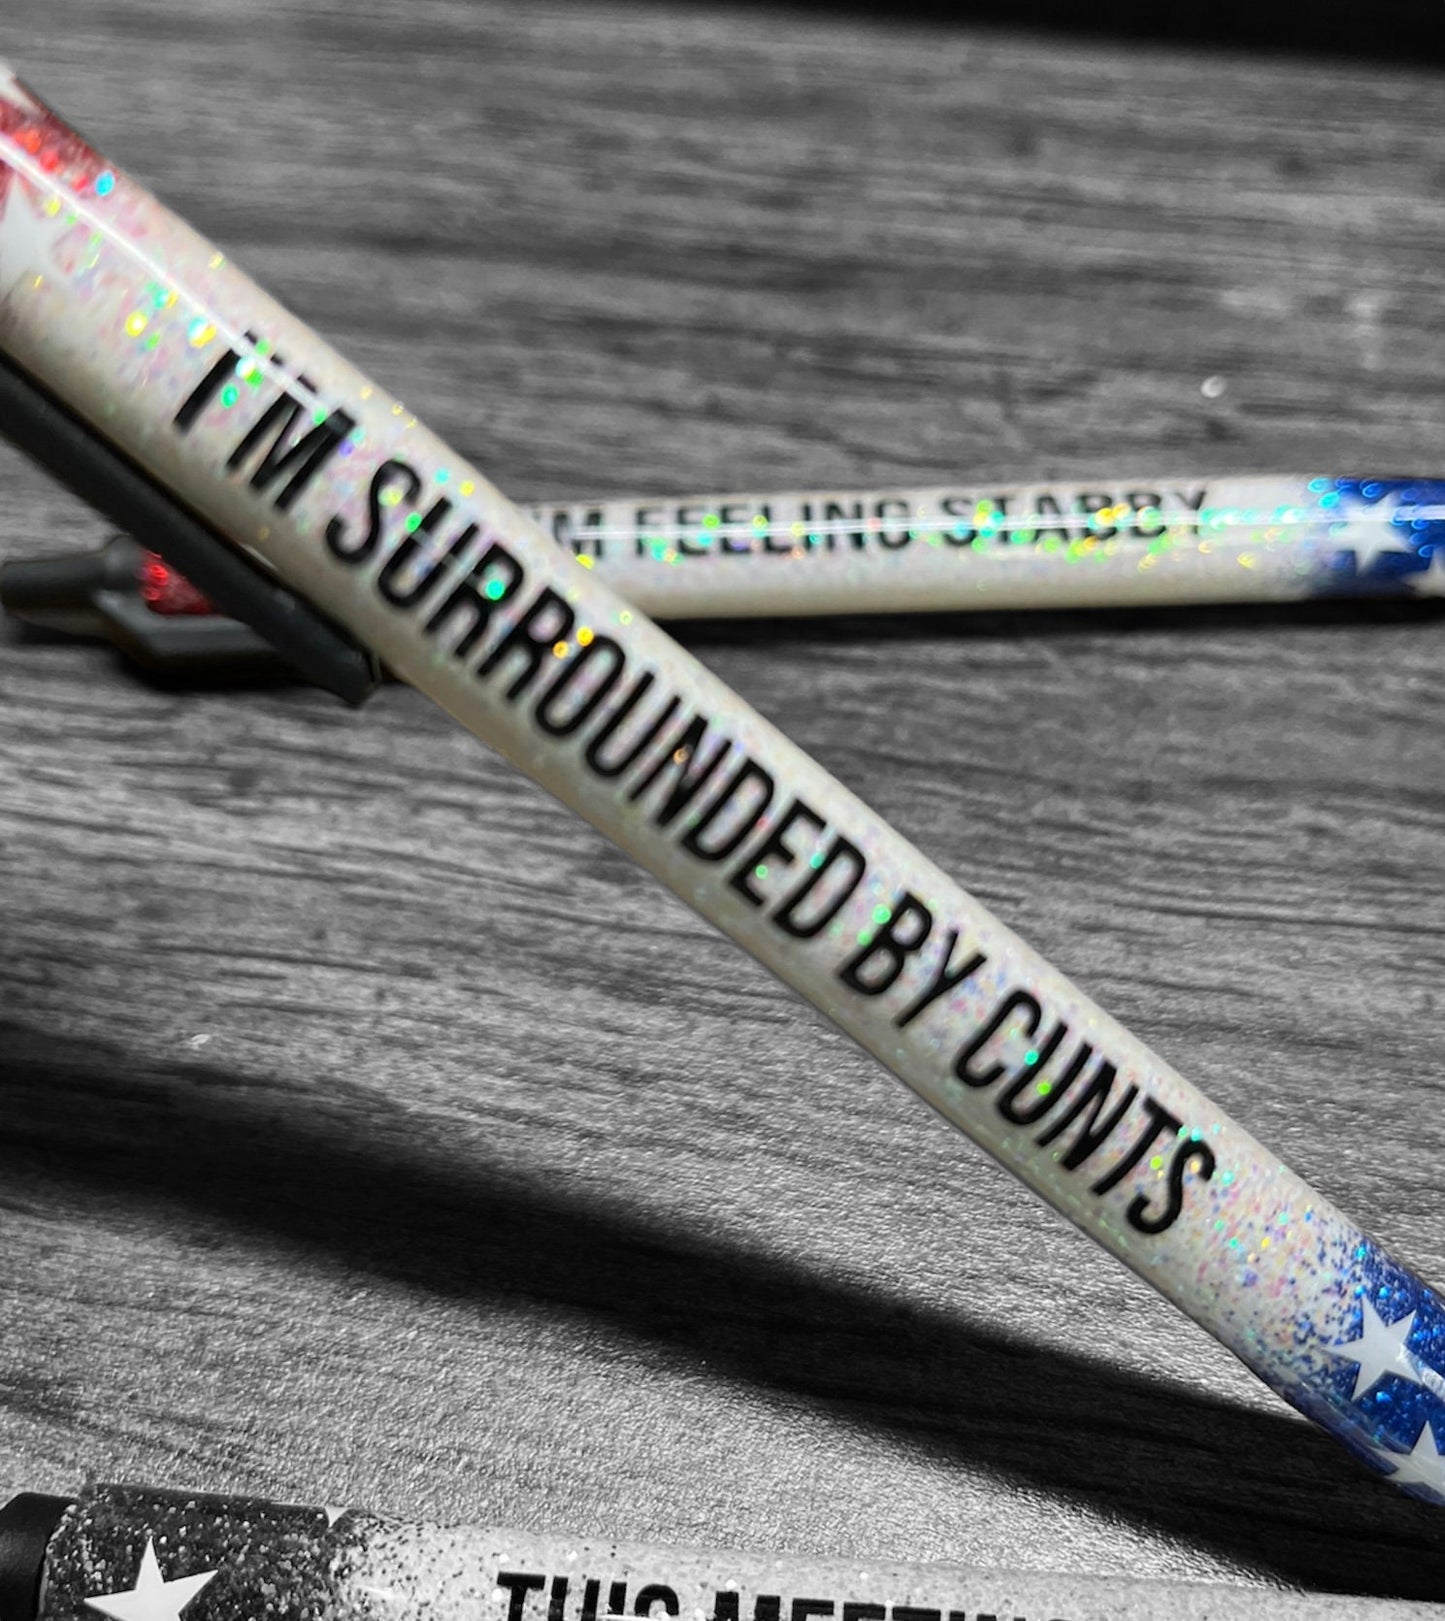 Glitter pens, funny saying pens, patriotic funny pens, gag gift, stocking stuffers, Christmas ideas, holidays 2021,